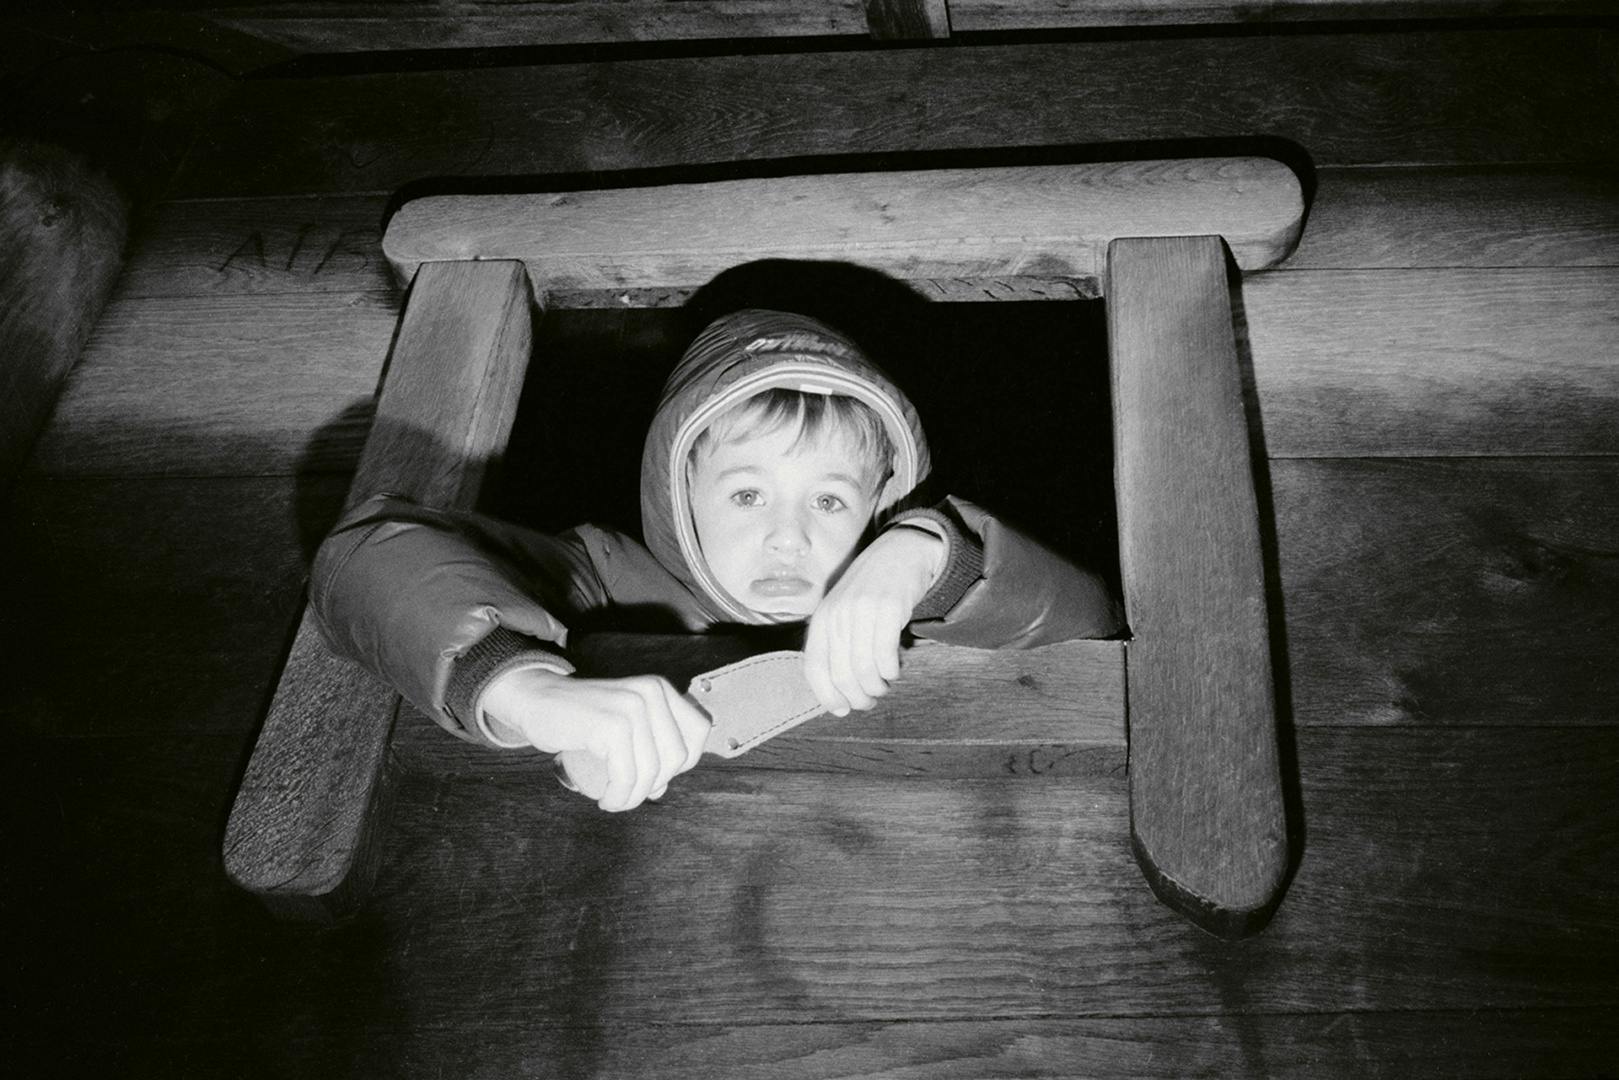 Black and white photo of a young boy wearing a hooded coat, poking out from a small window with a glum expression